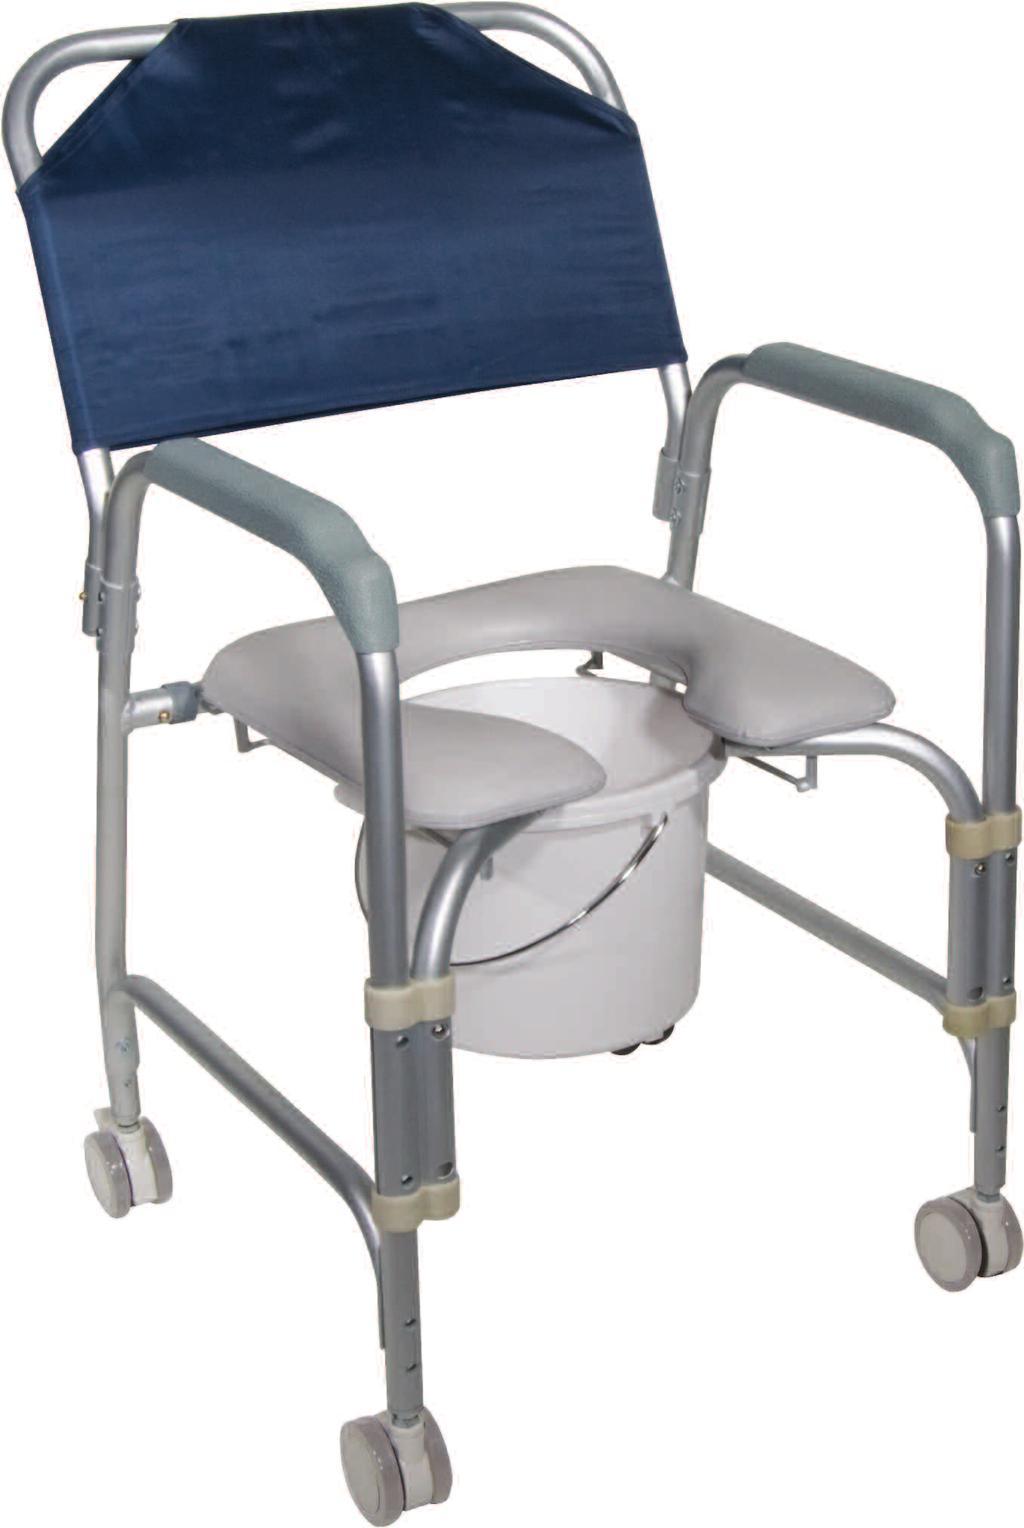 117 New Folding, Portable, Upholstered Commode with Wheels and Drop Arm COMES STANDARD